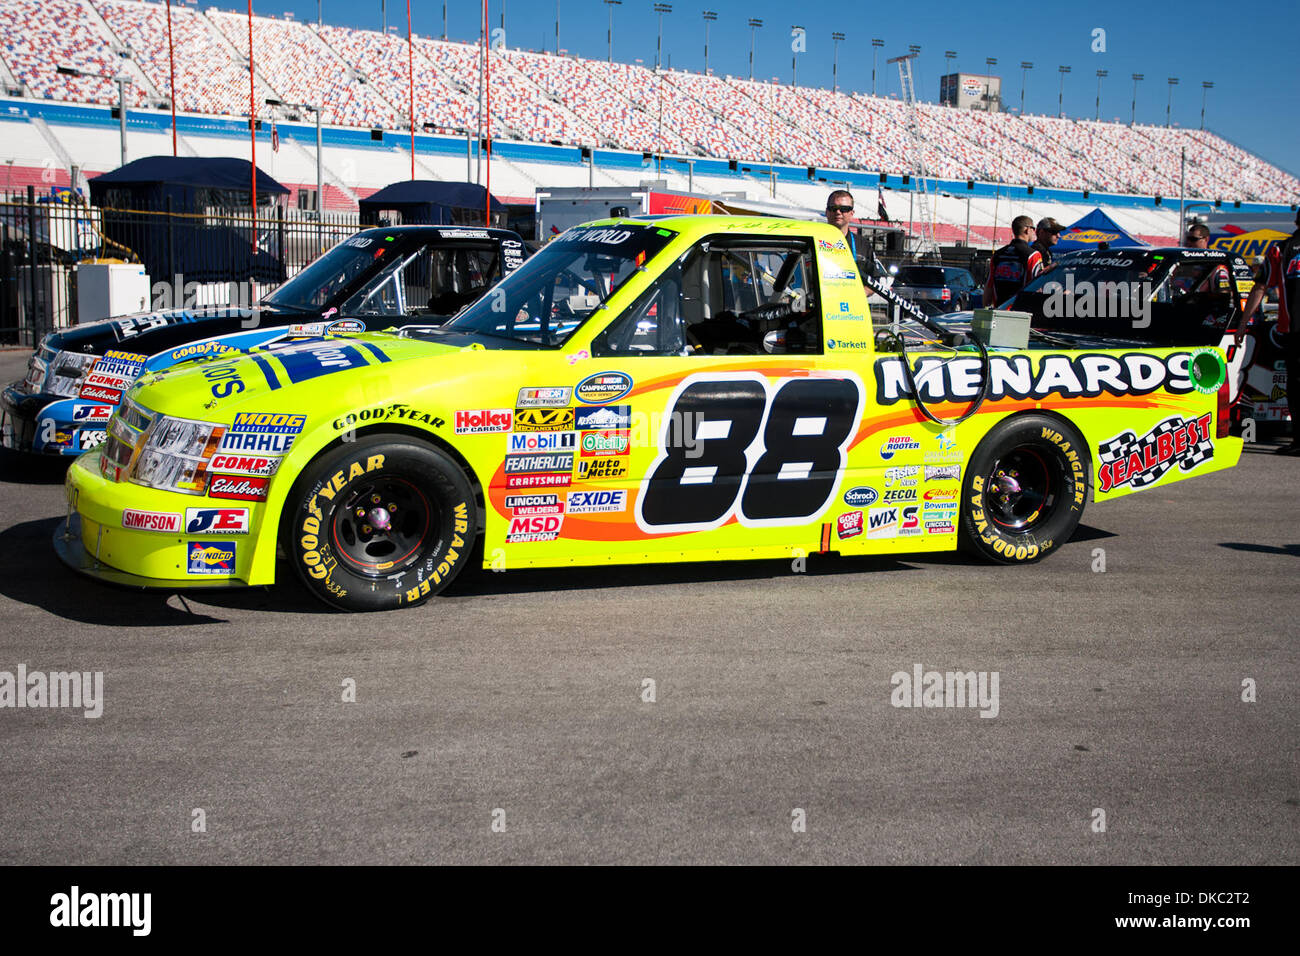 Oct. 15, 2011 - Las Vegas, Nevada, U.S - The #88 Ideal Door / Menards Chevrolet Silverado is sitting in the pits just before getting ready to be rolled out onto the track before the beginning of the NASCAR Camping World Truck Series Smith's 350 at Las Vegas Motor Speedway in Las Vegas, Nevada. (Credit Image: © Matt Gdowski/Southcreek/ZUMAPRESS.com) Stock Photo